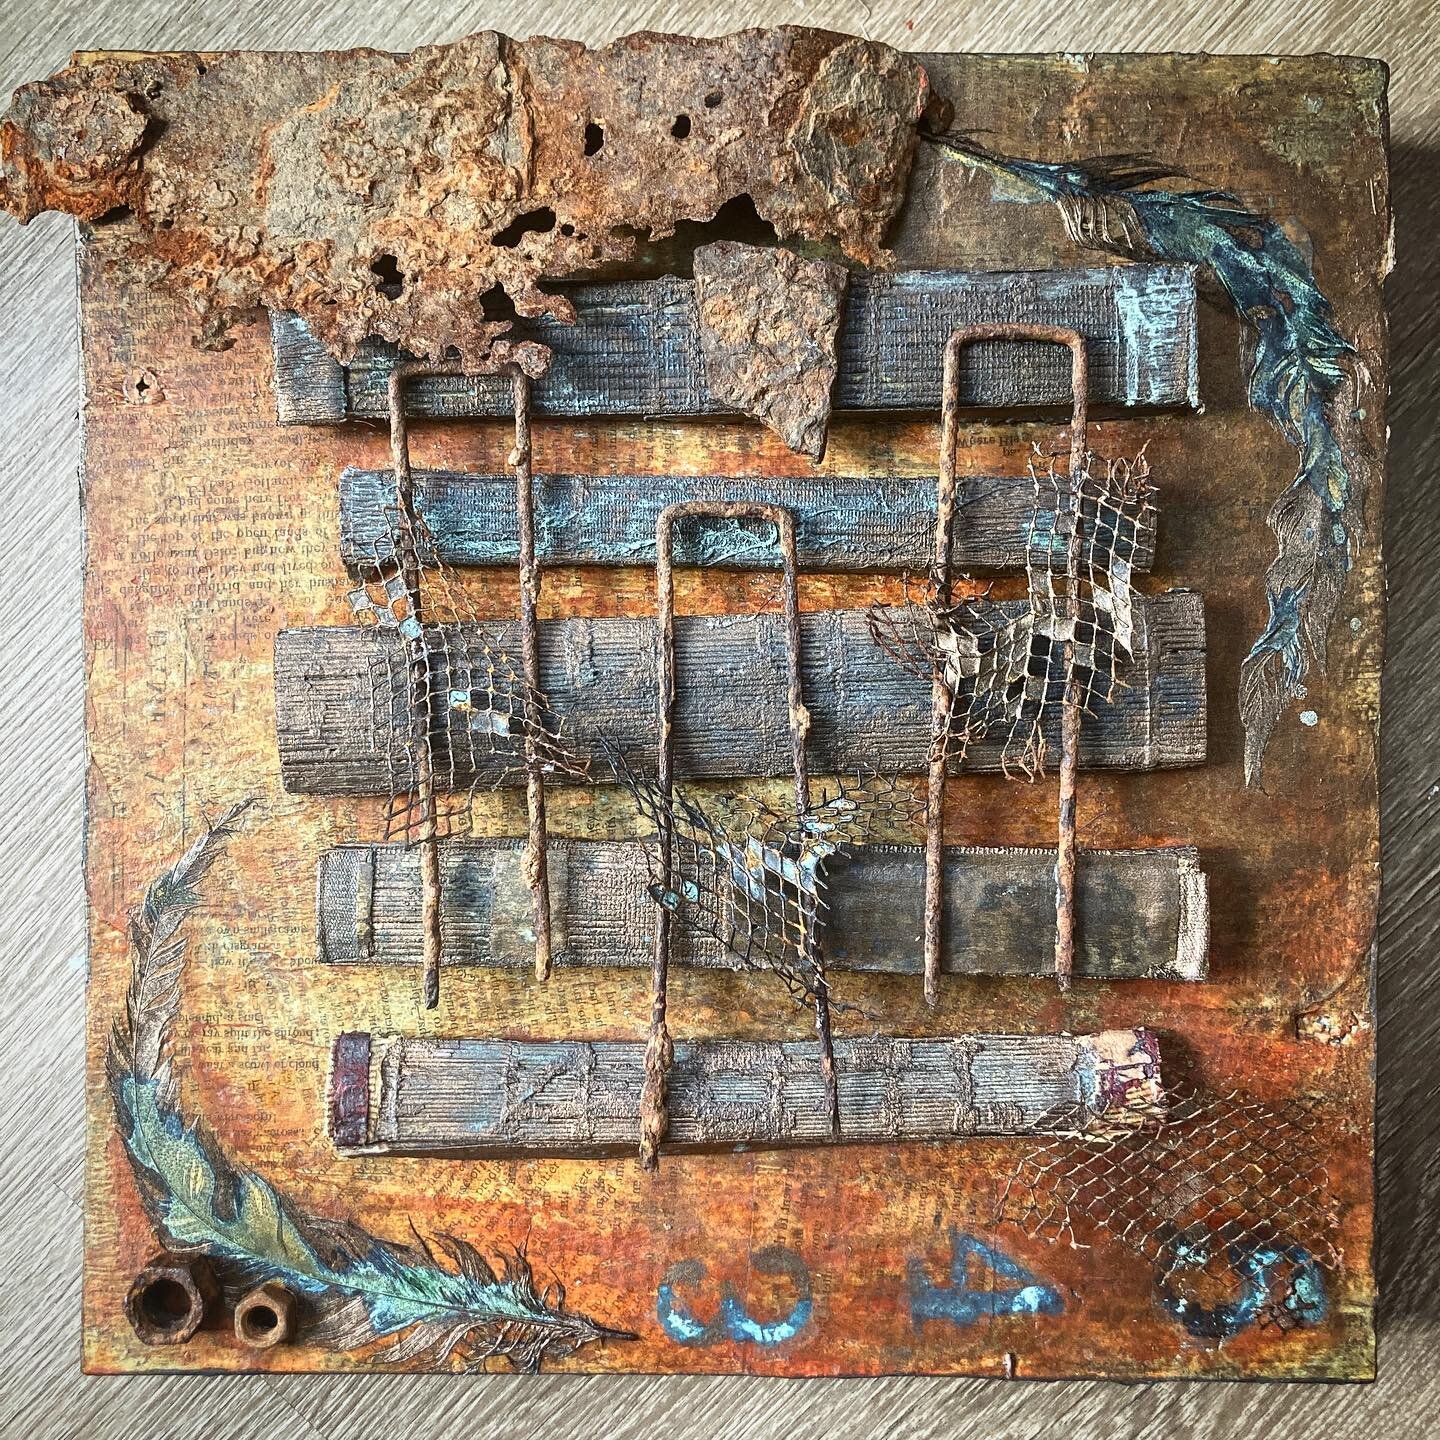 &ldquo;A Score&rdquo;
12&rdquo;x12&rdquo;
mixed media/reclaimed wood
$550
DM/email

&ldquo;In the most general sense, it is the very order and harmony of its appearance that distinguishes the art object as an oasis in a disturbingly chaotic world. An